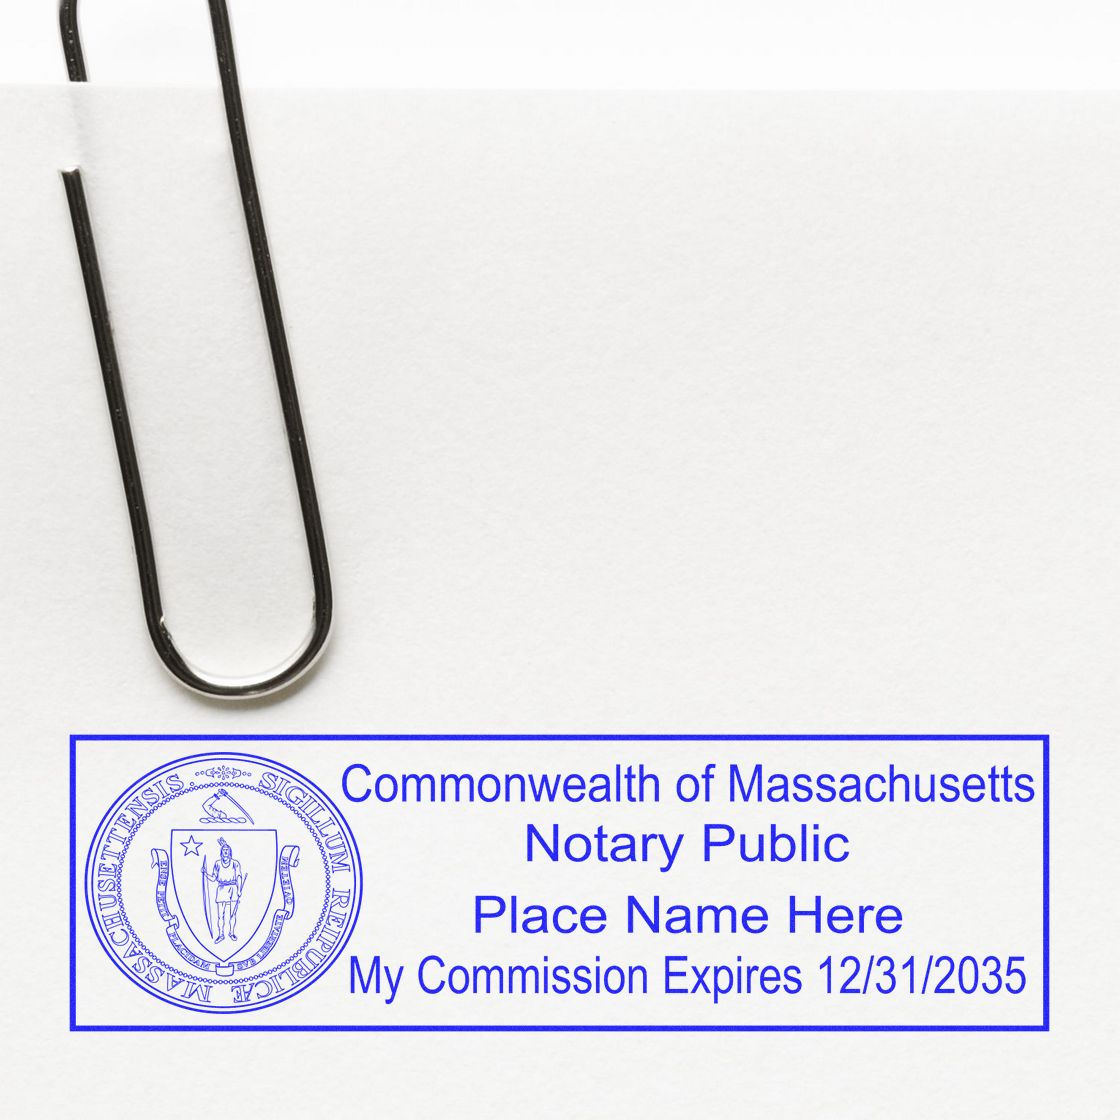 An alternative view of the Heavy-Duty Massachusetts Rectangular Notary Stamp stamped on a sheet of paper showing the image in use